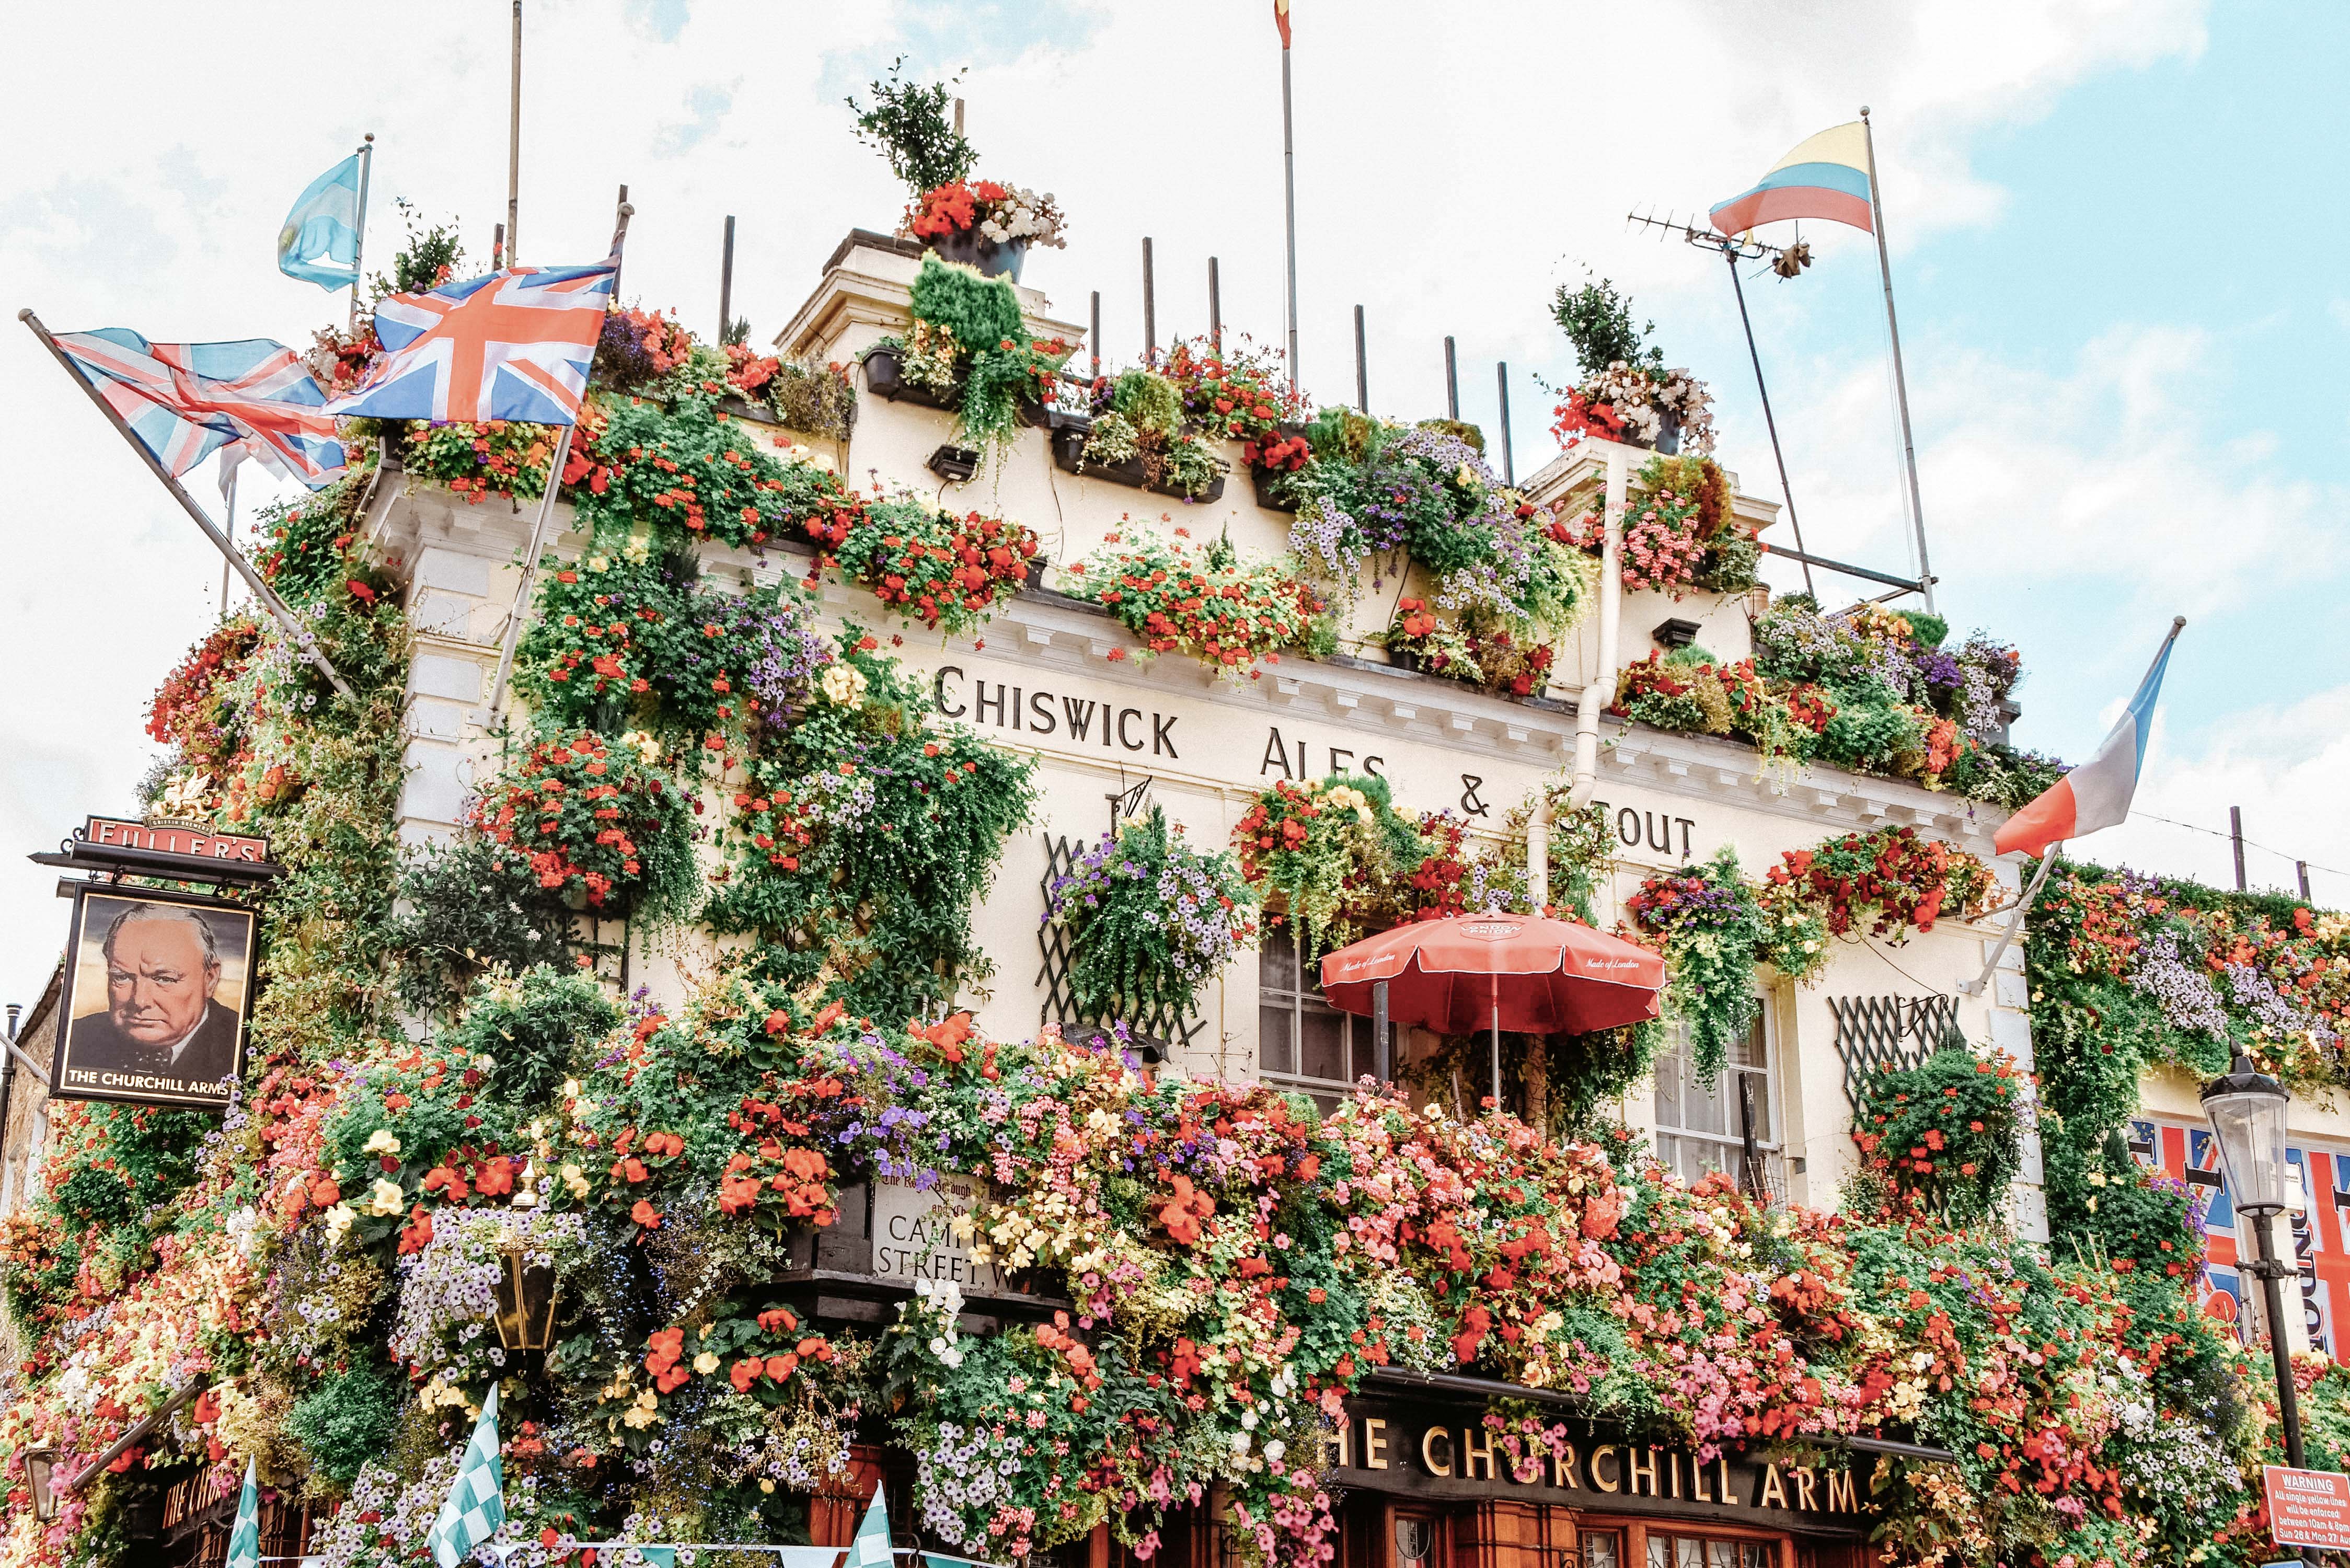 London's prettiest pub? Flower covered facade of the Churchill Arms